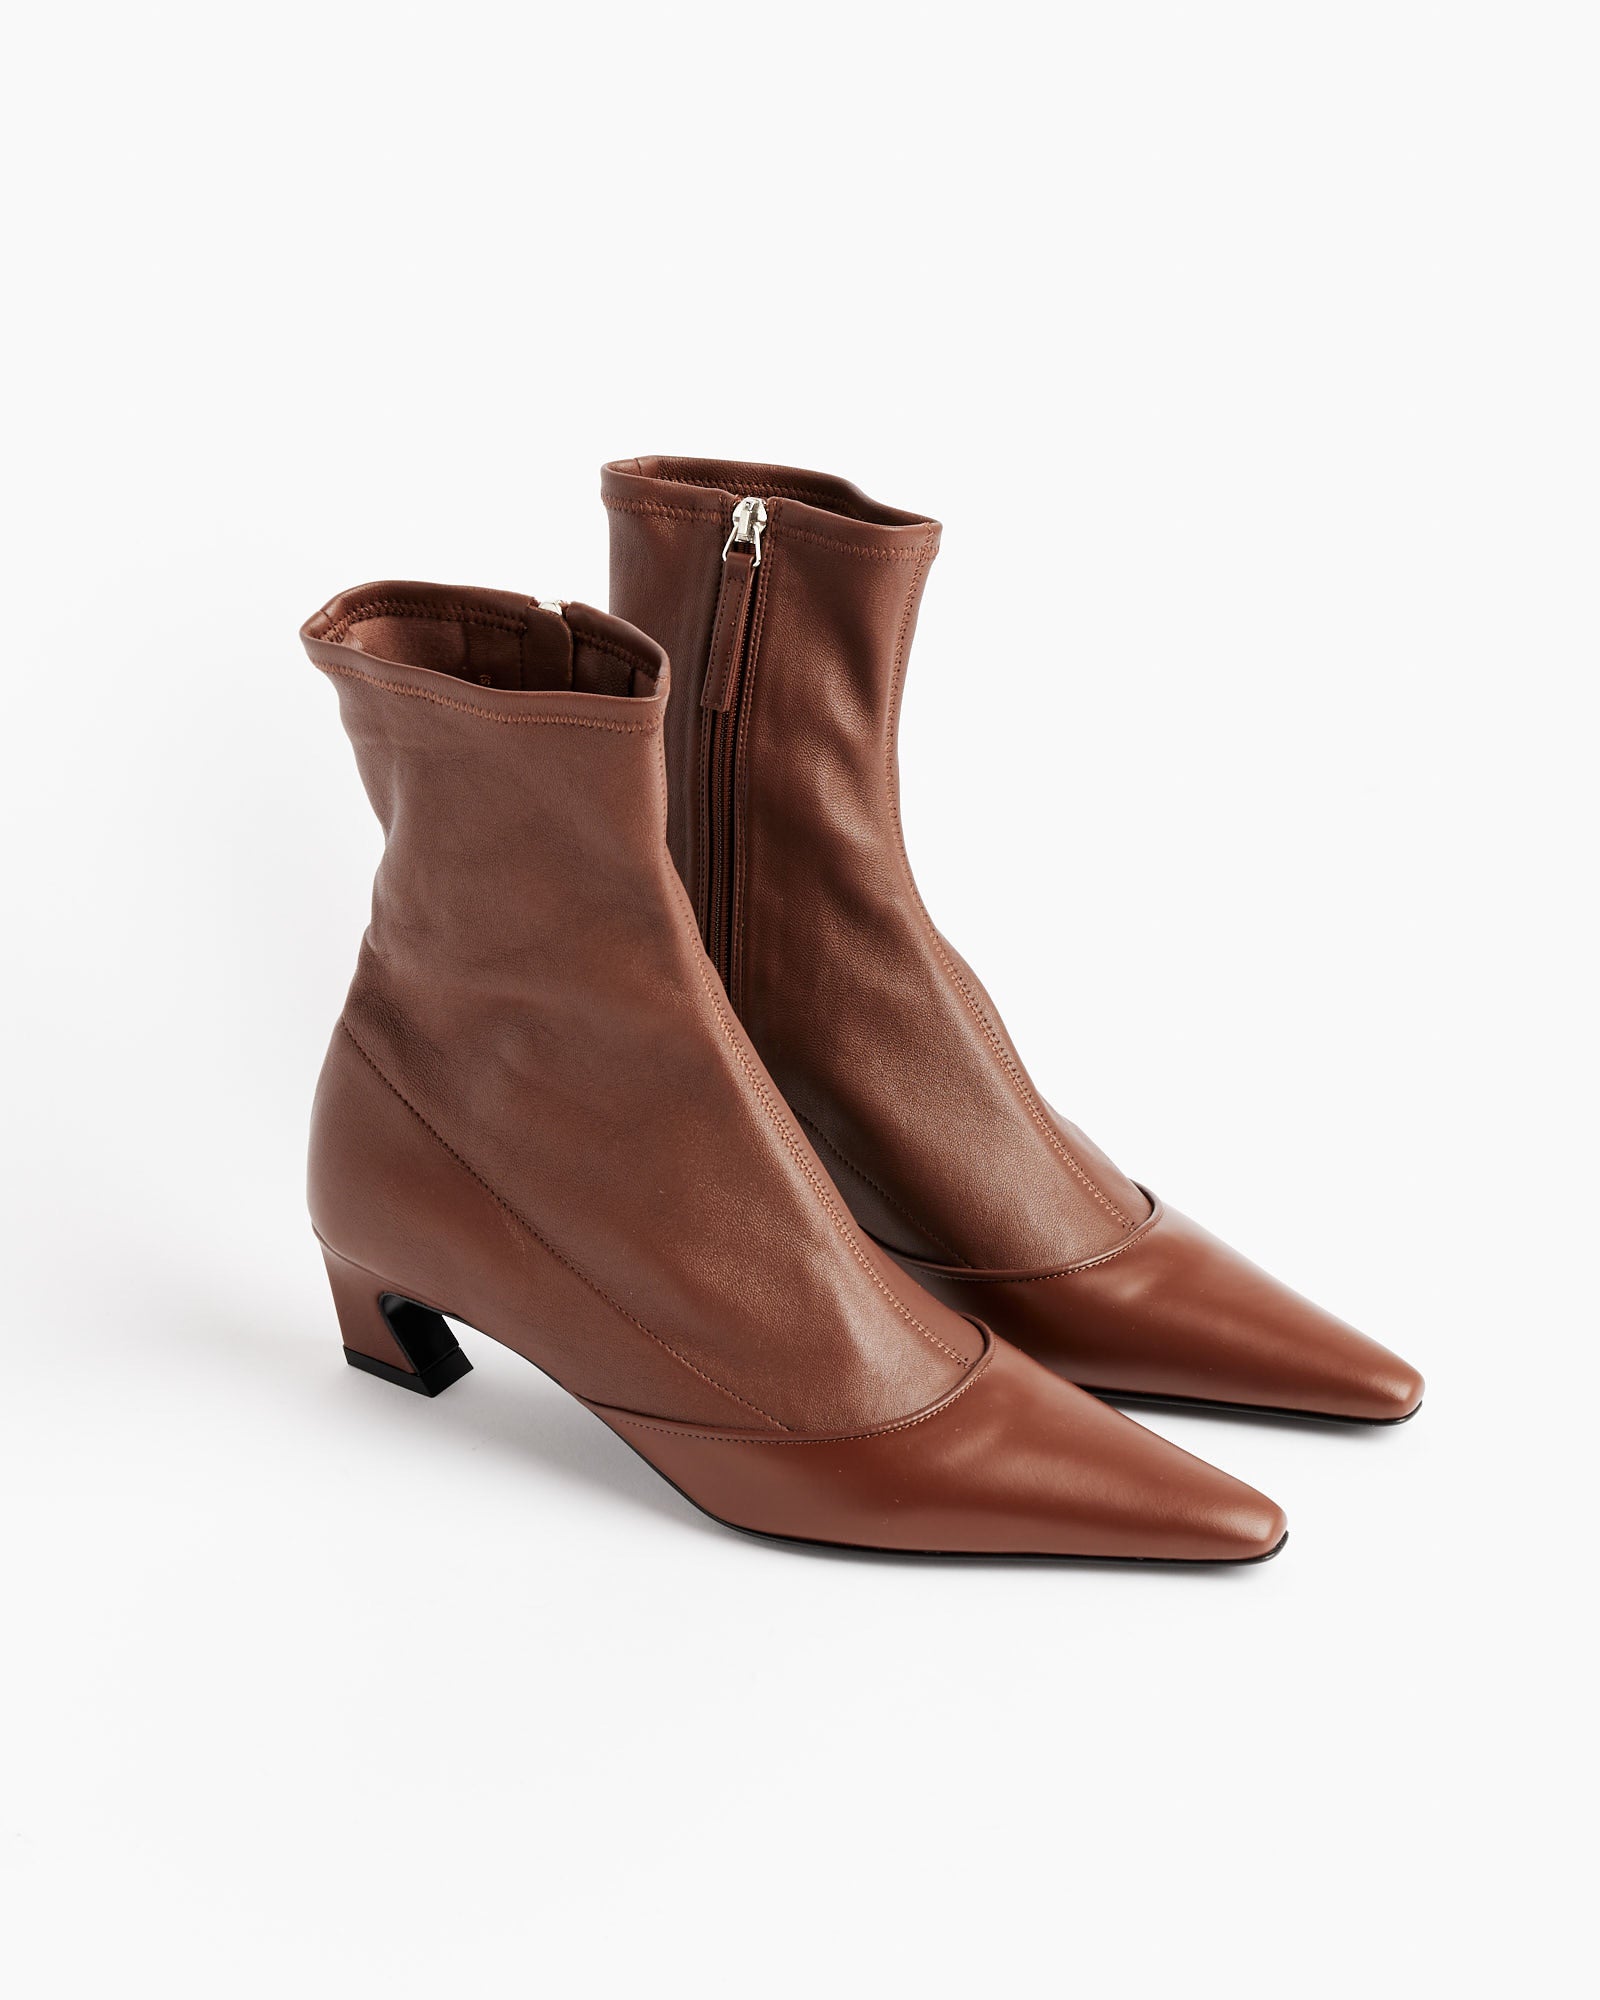 Heeled Ankle Boot in Cognac Brown